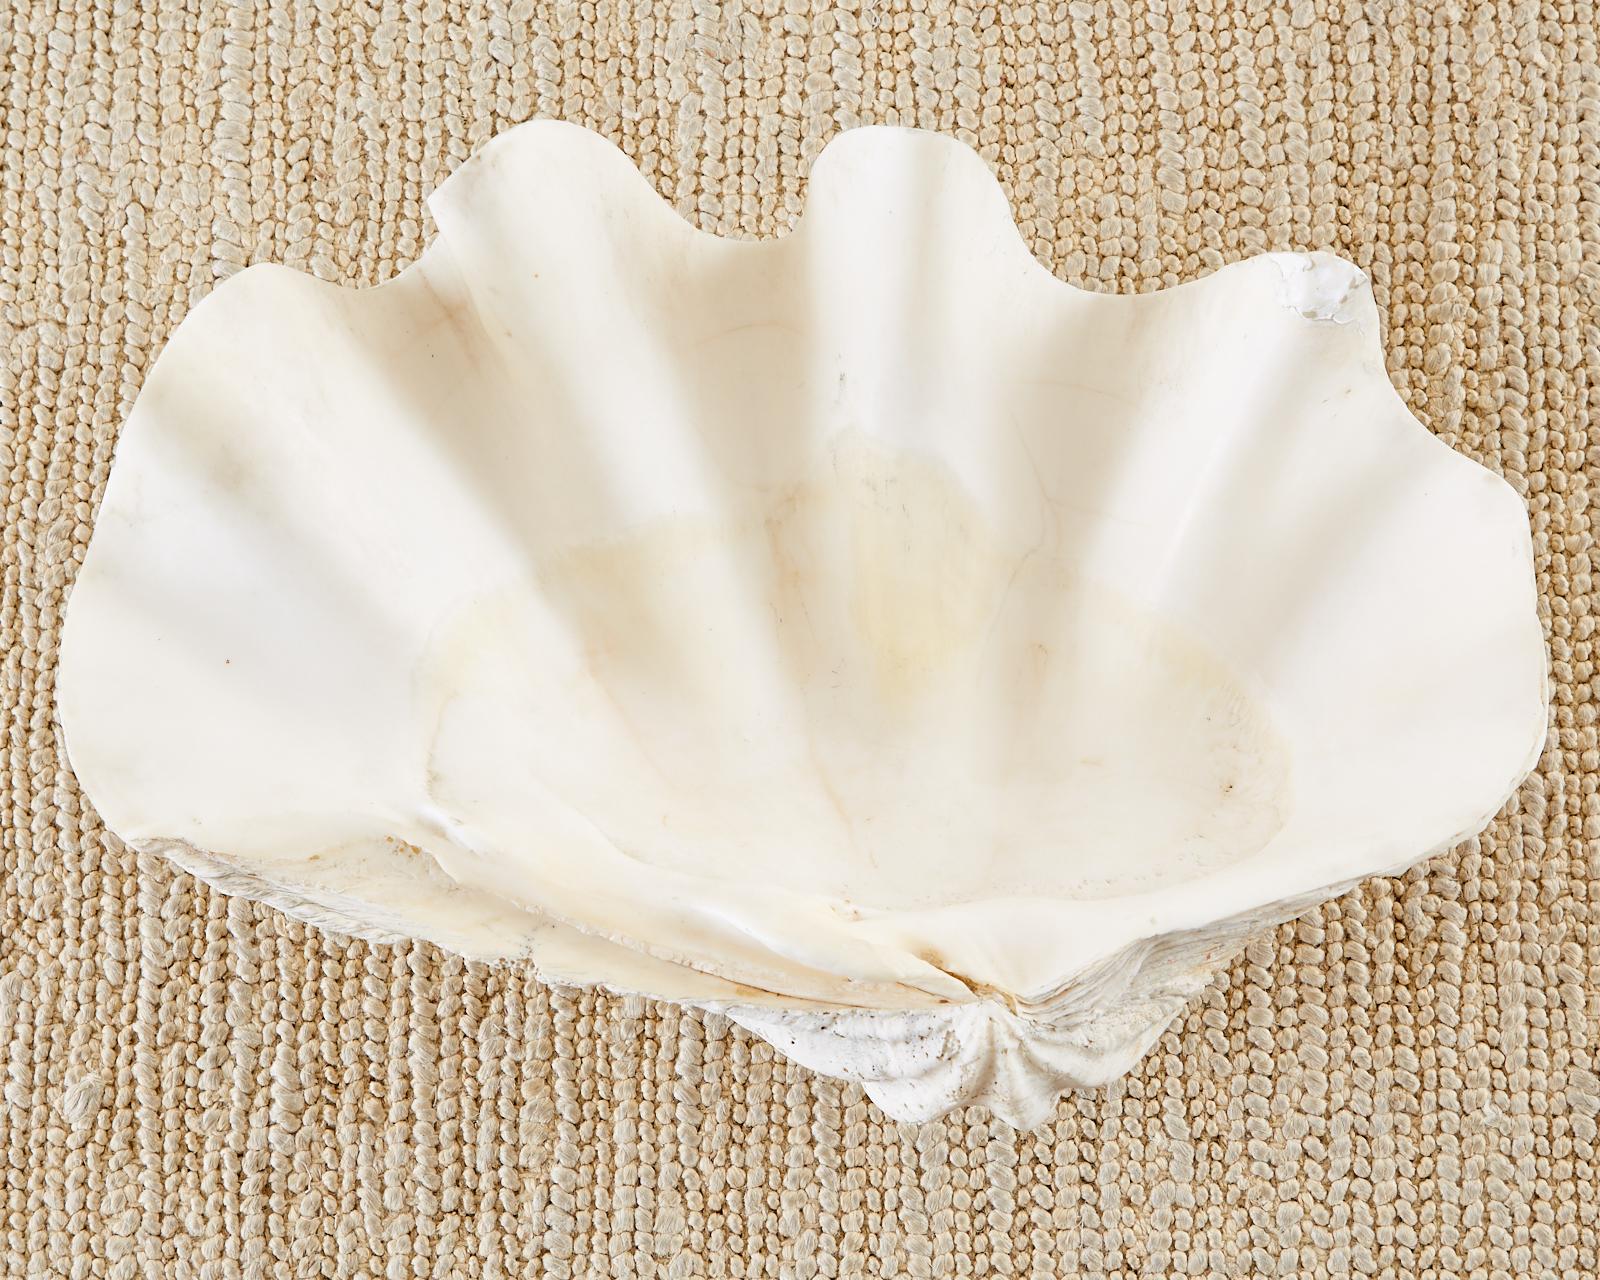 South Pacific Natural Giant Clam Shell Specimen 6